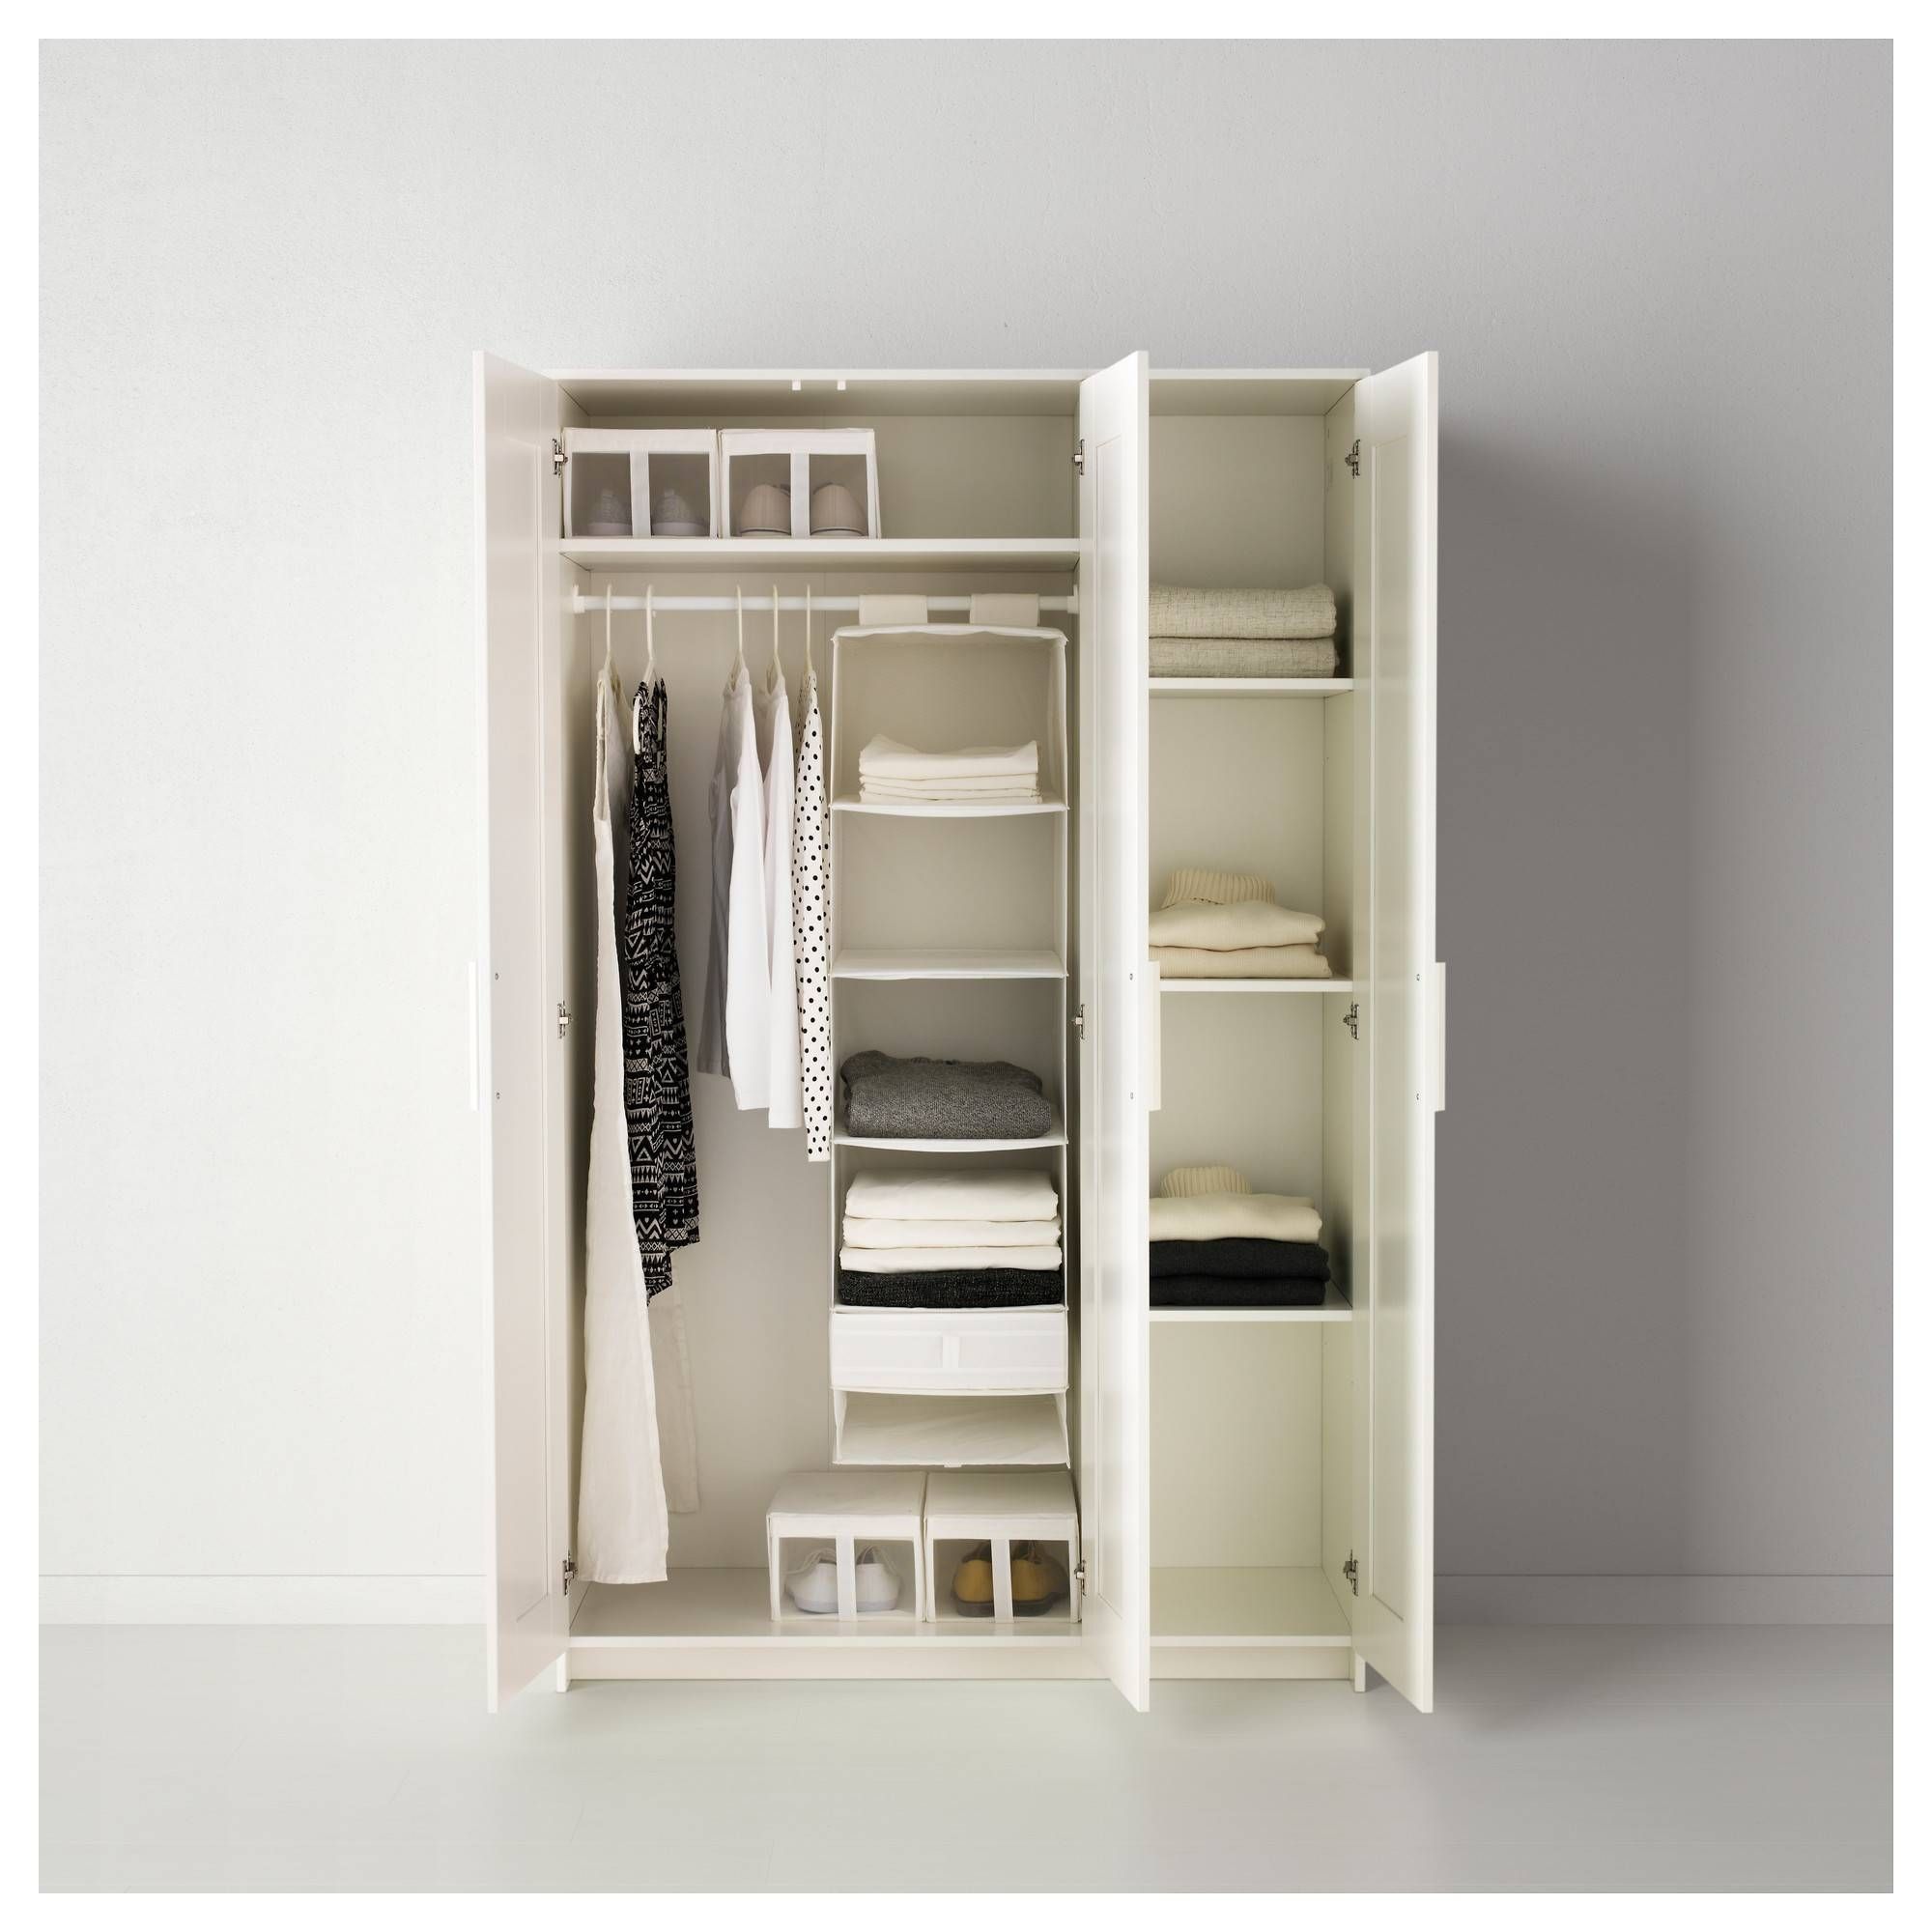 Wardrobes Drawers Inside – Chest Of Drawers Intended For White Wood Wardrobes With Drawers (View 8 of 15)